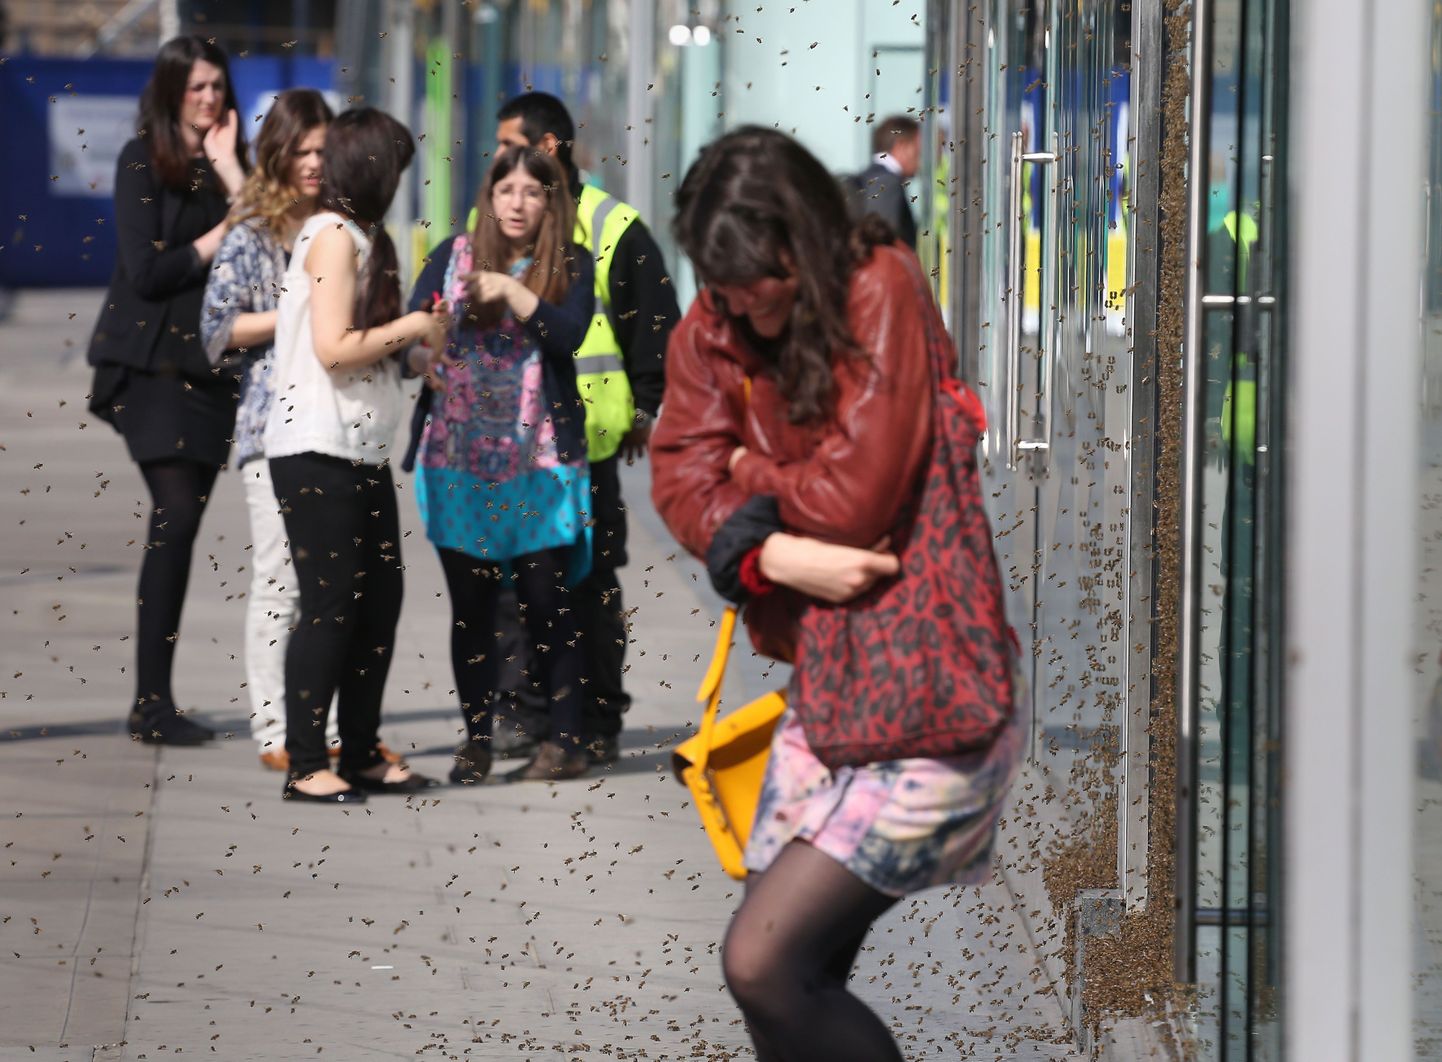 A woman huddles up as she walks past a swarm of about 5,000 honeybees that have been attracted to a discount sign on the window of a shop in central London, Friday, May 16, 2014, turning the fashion store display into a carpet of insects. It is understood the unusual nesting place was picked by the Queen bee, who landed there first and was quickly followed by her devoted colony. (AP Photo/PA, Philip Toscano)  UNITED KINGDOM OUT  NO SALES  NO ARCHIVE / TT / kod 436